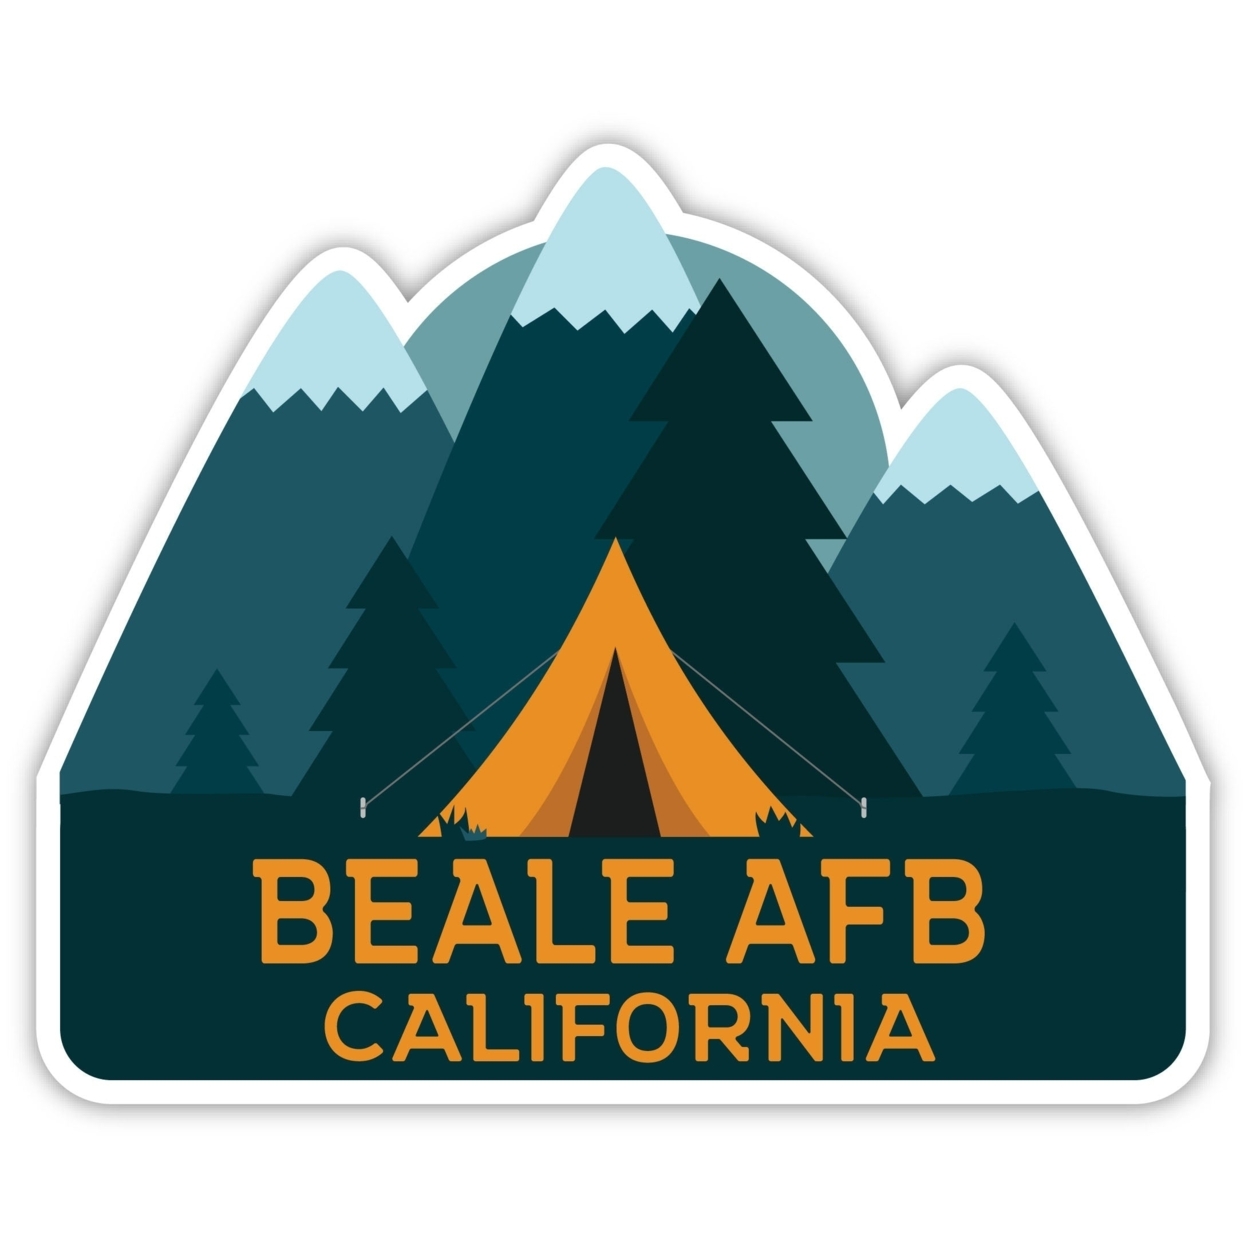 Beale AFB California Souvenir Decorative Stickers (Choose Theme And Size) - 4-Pack, 2-Inch, Tent